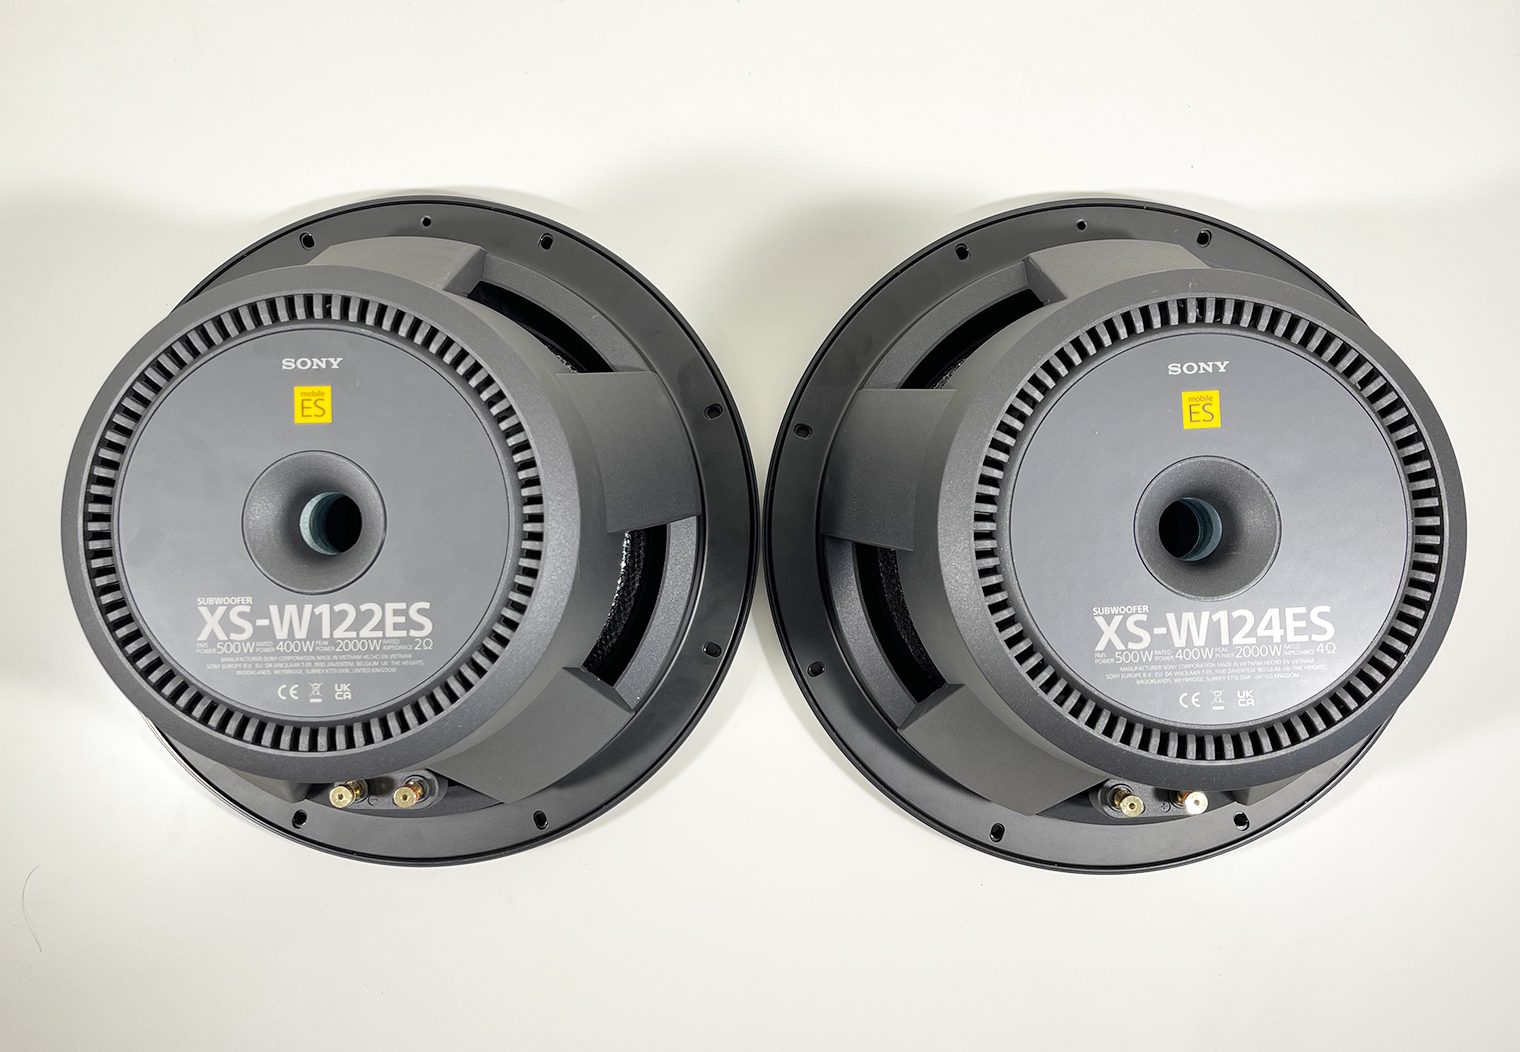 Rear view of the XS-W122ES and XS-W124ES subwoofers with the motor structure, ventilated, five-beam frame